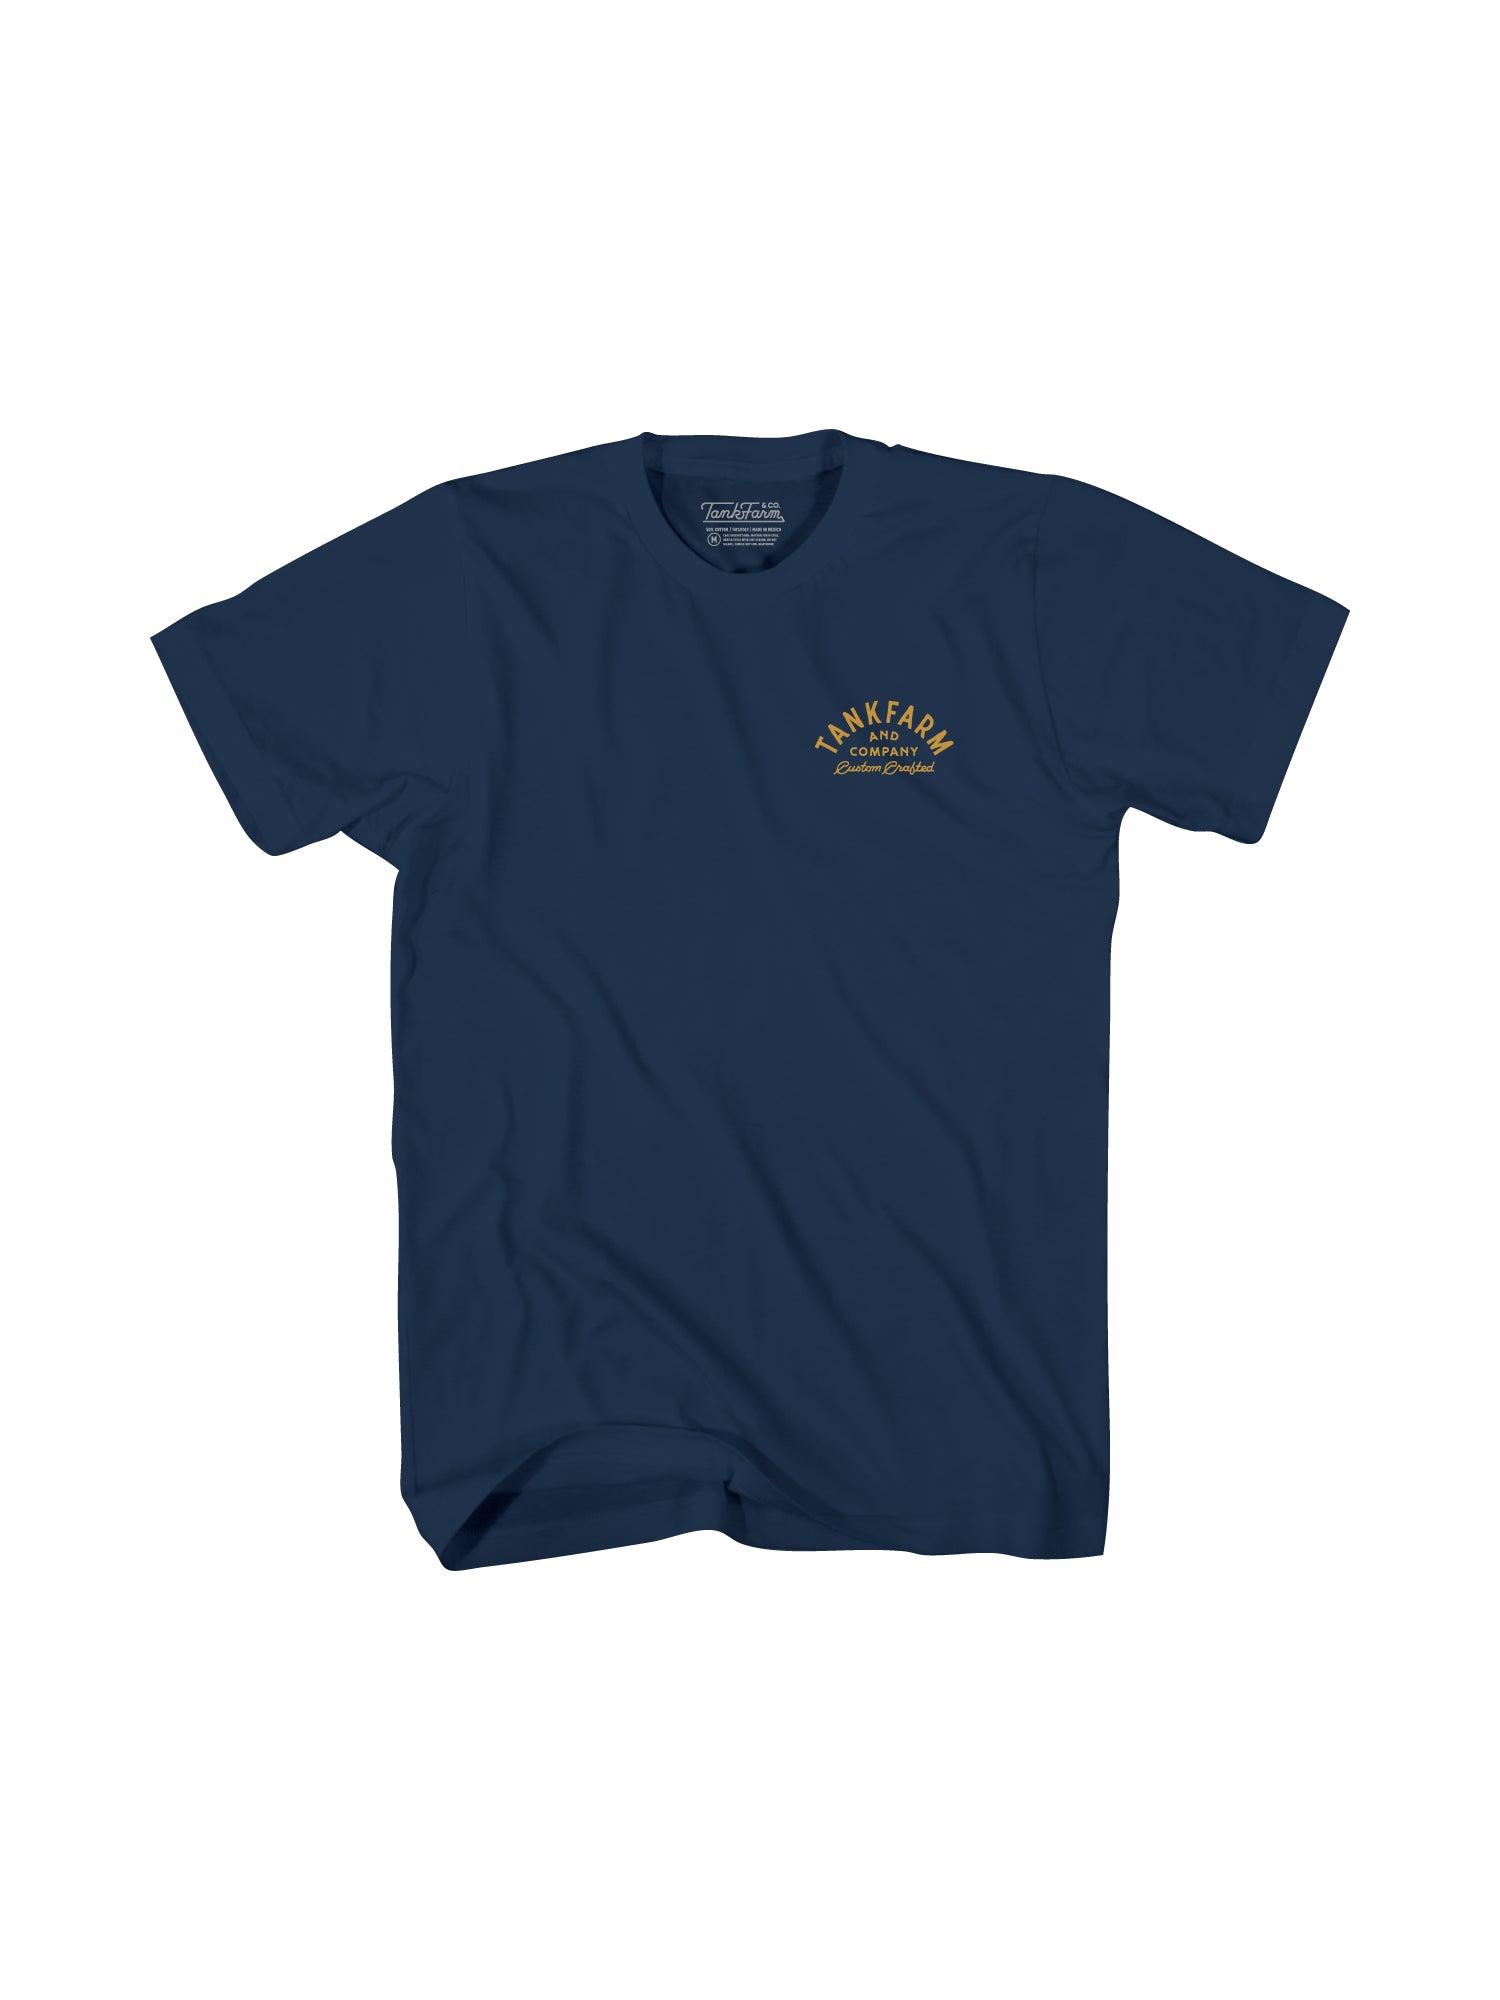 CRAFTED IN SB - NAVY